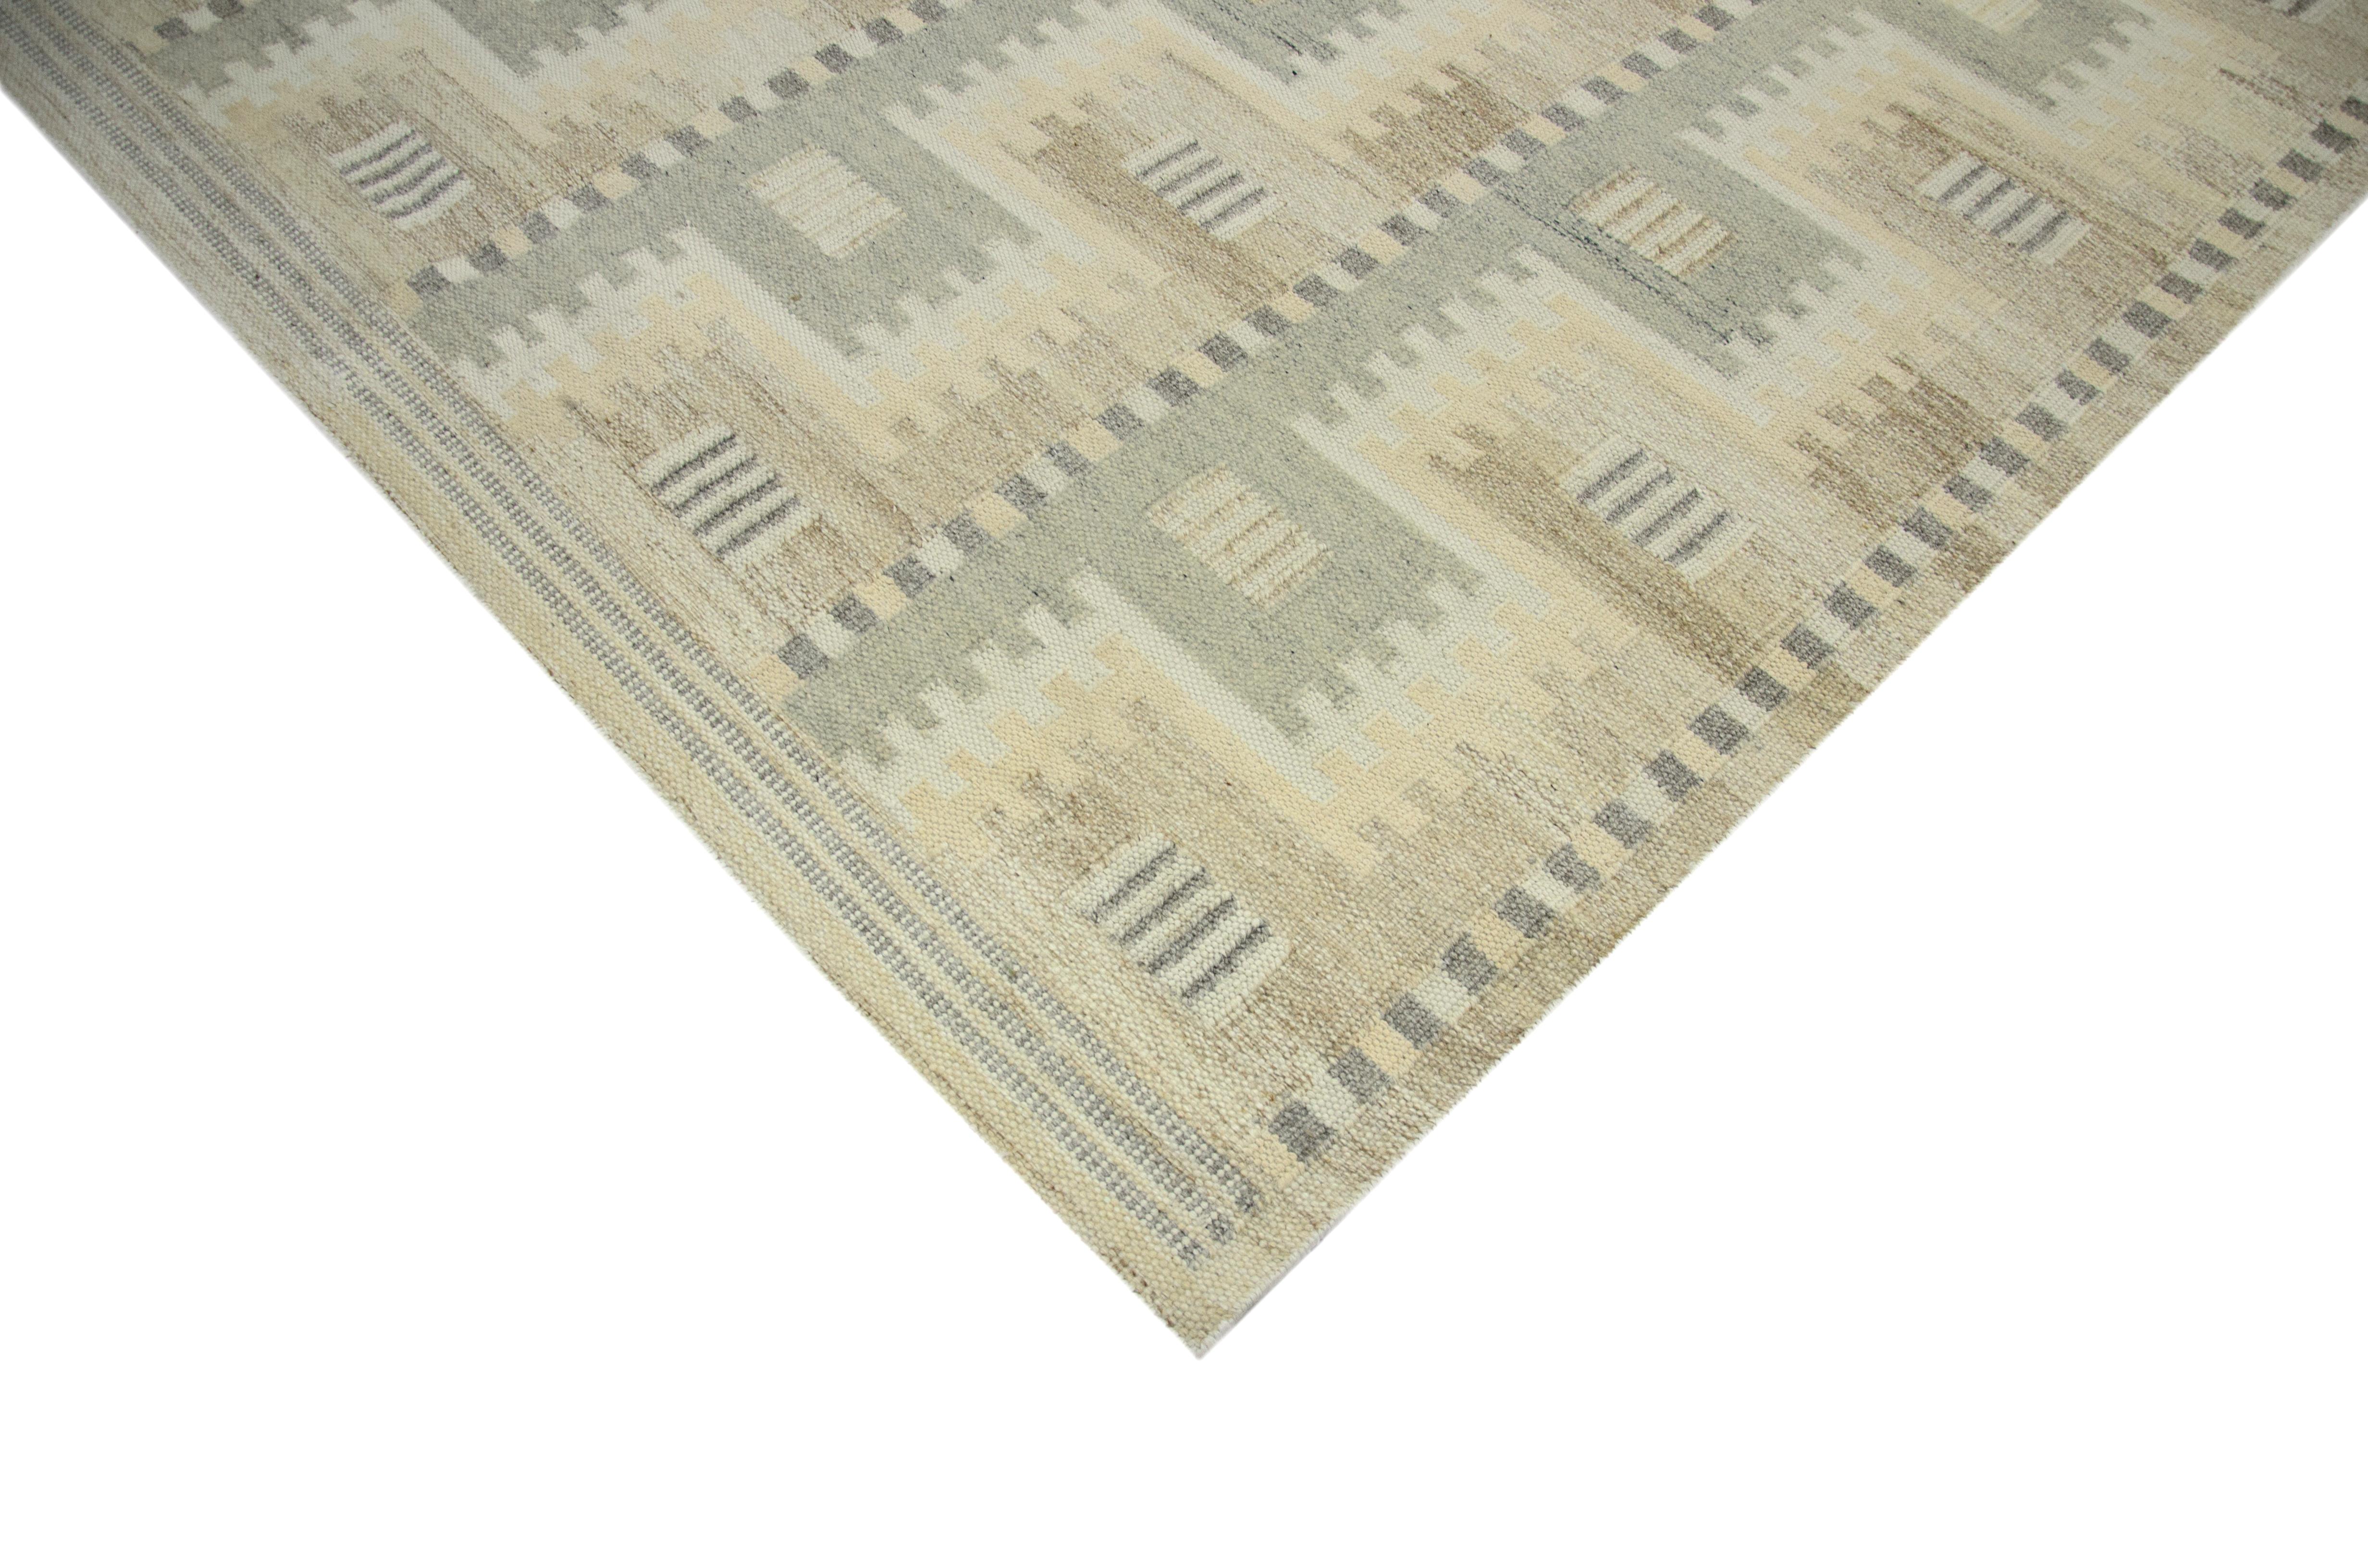 Modern area rug is handwoven in Scandinavian design using fine wool and organic dyes. It features an exquisite ivory field with geometric patterns in gray and brown. This piece will surely look fabulous in modern and contemporary interiors. It has a